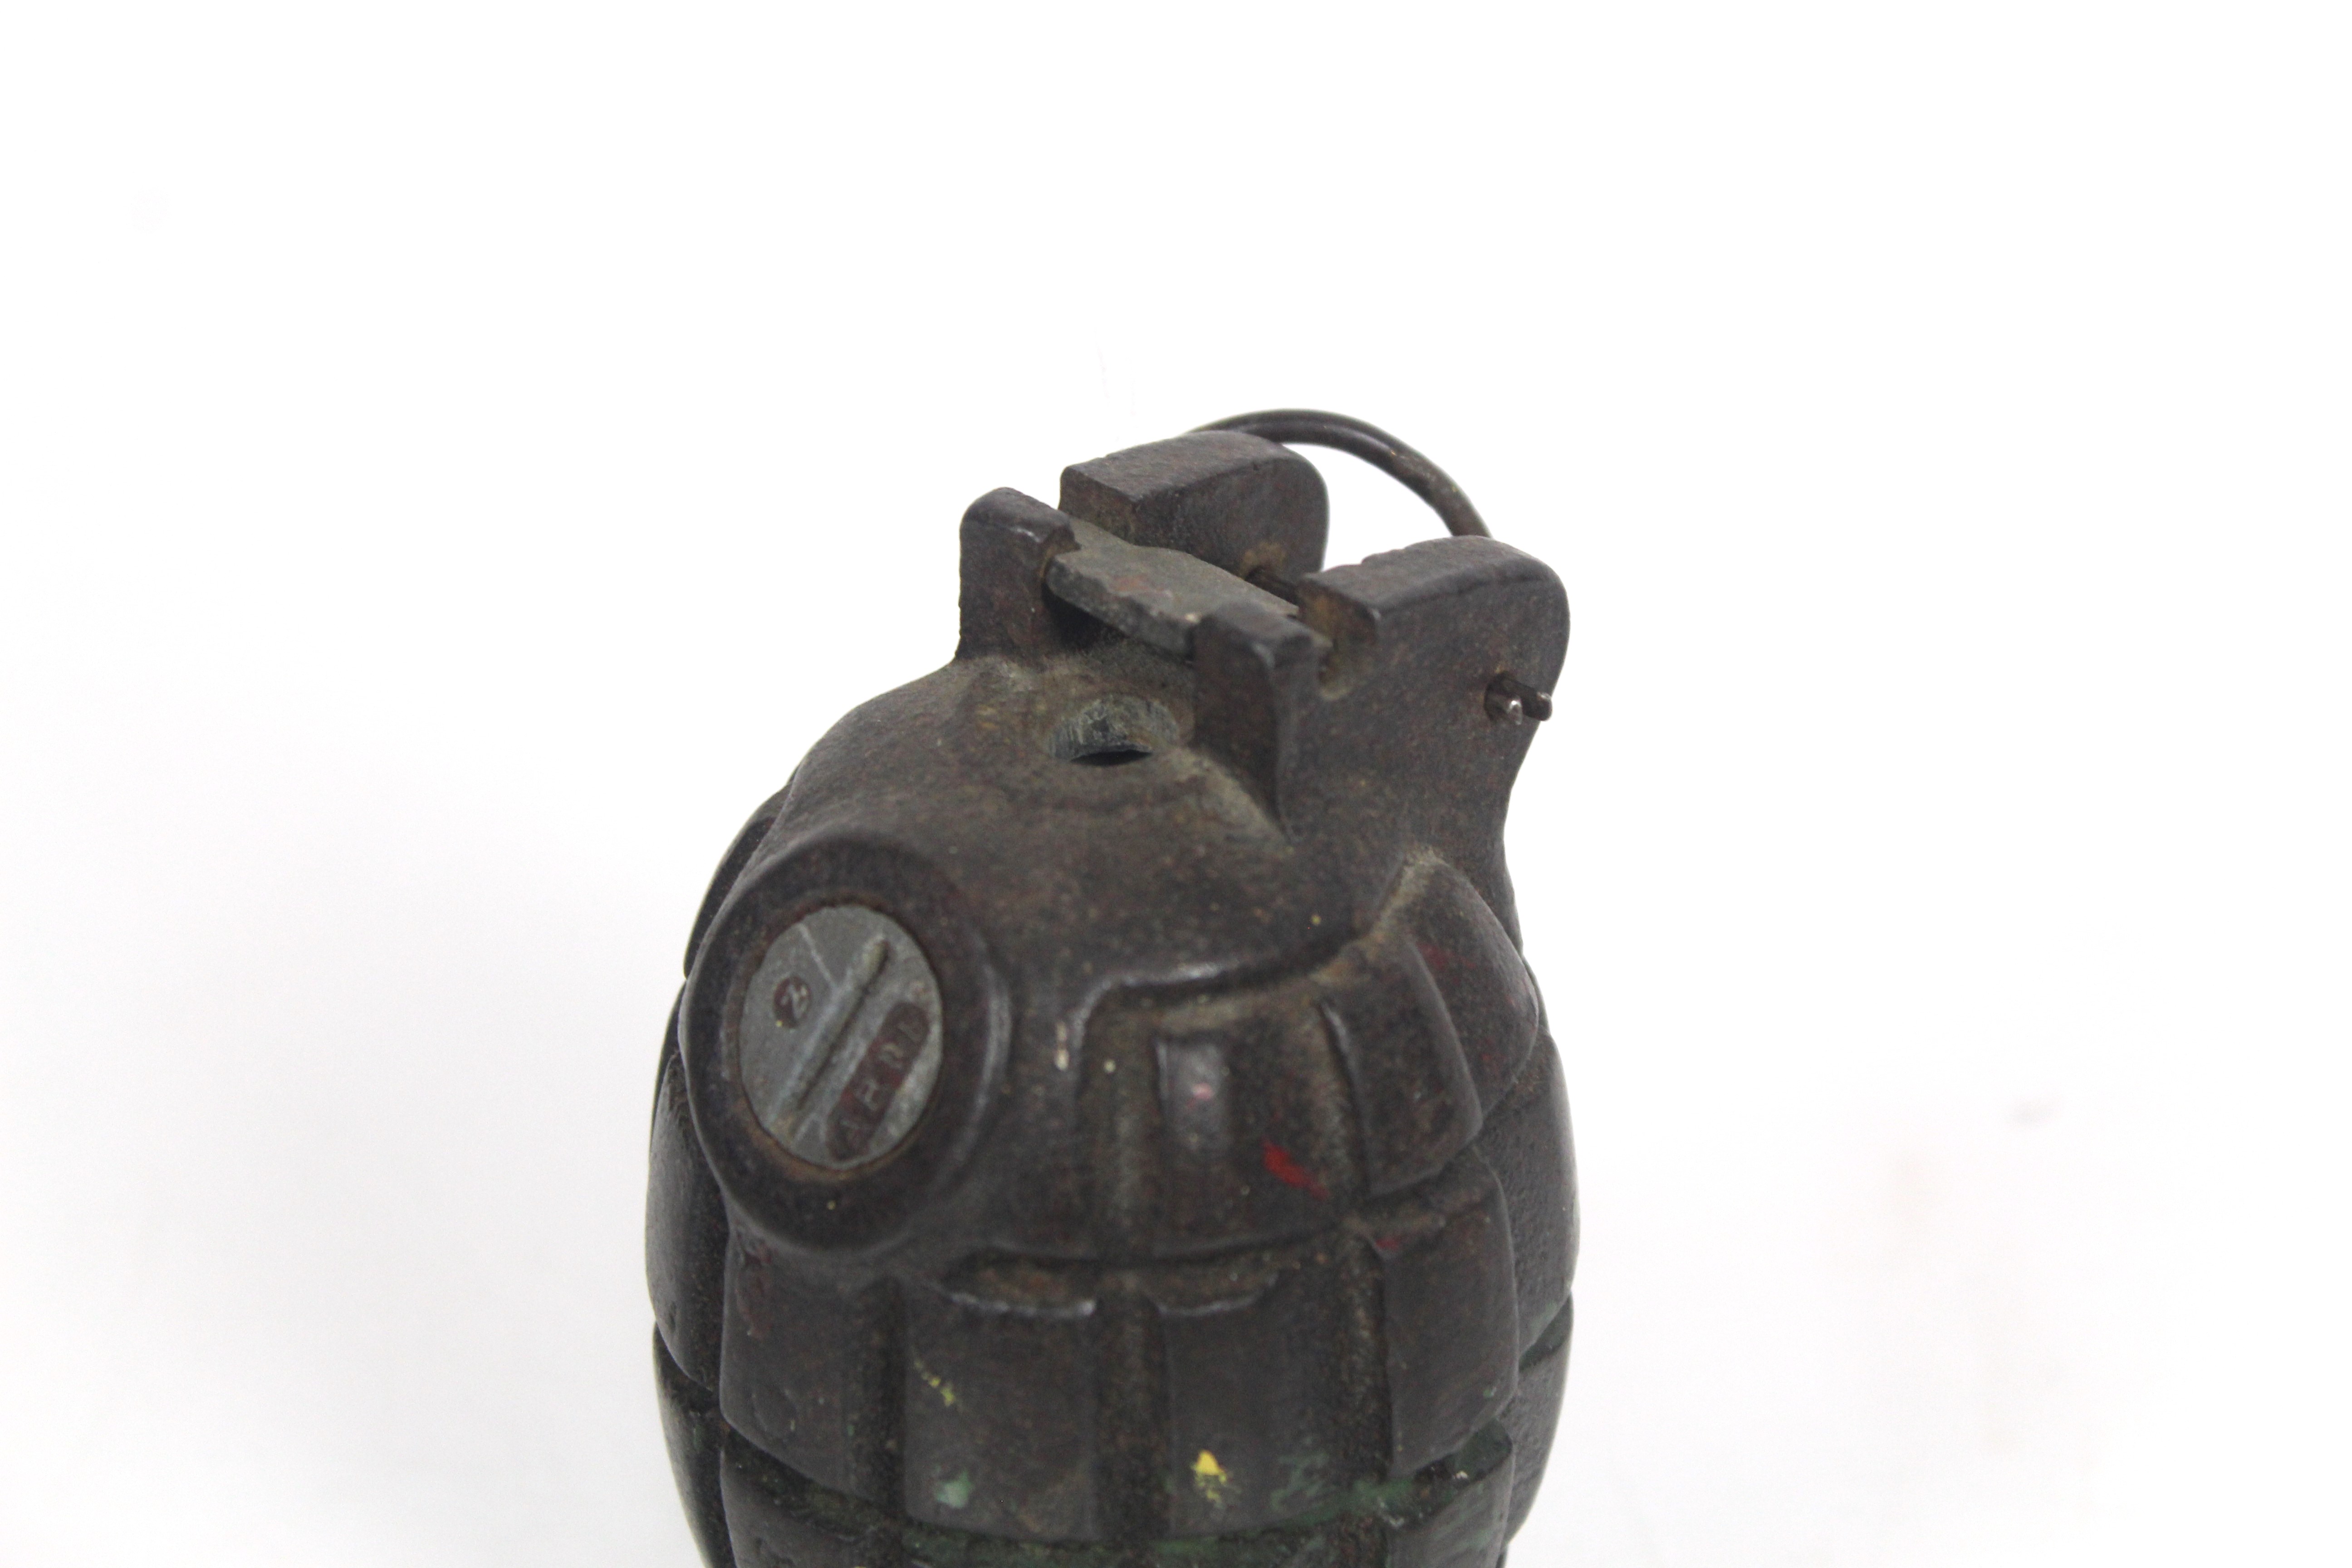 A 1940 dated Mills No. 36 rifle grenade, in good c - Image 3 of 6